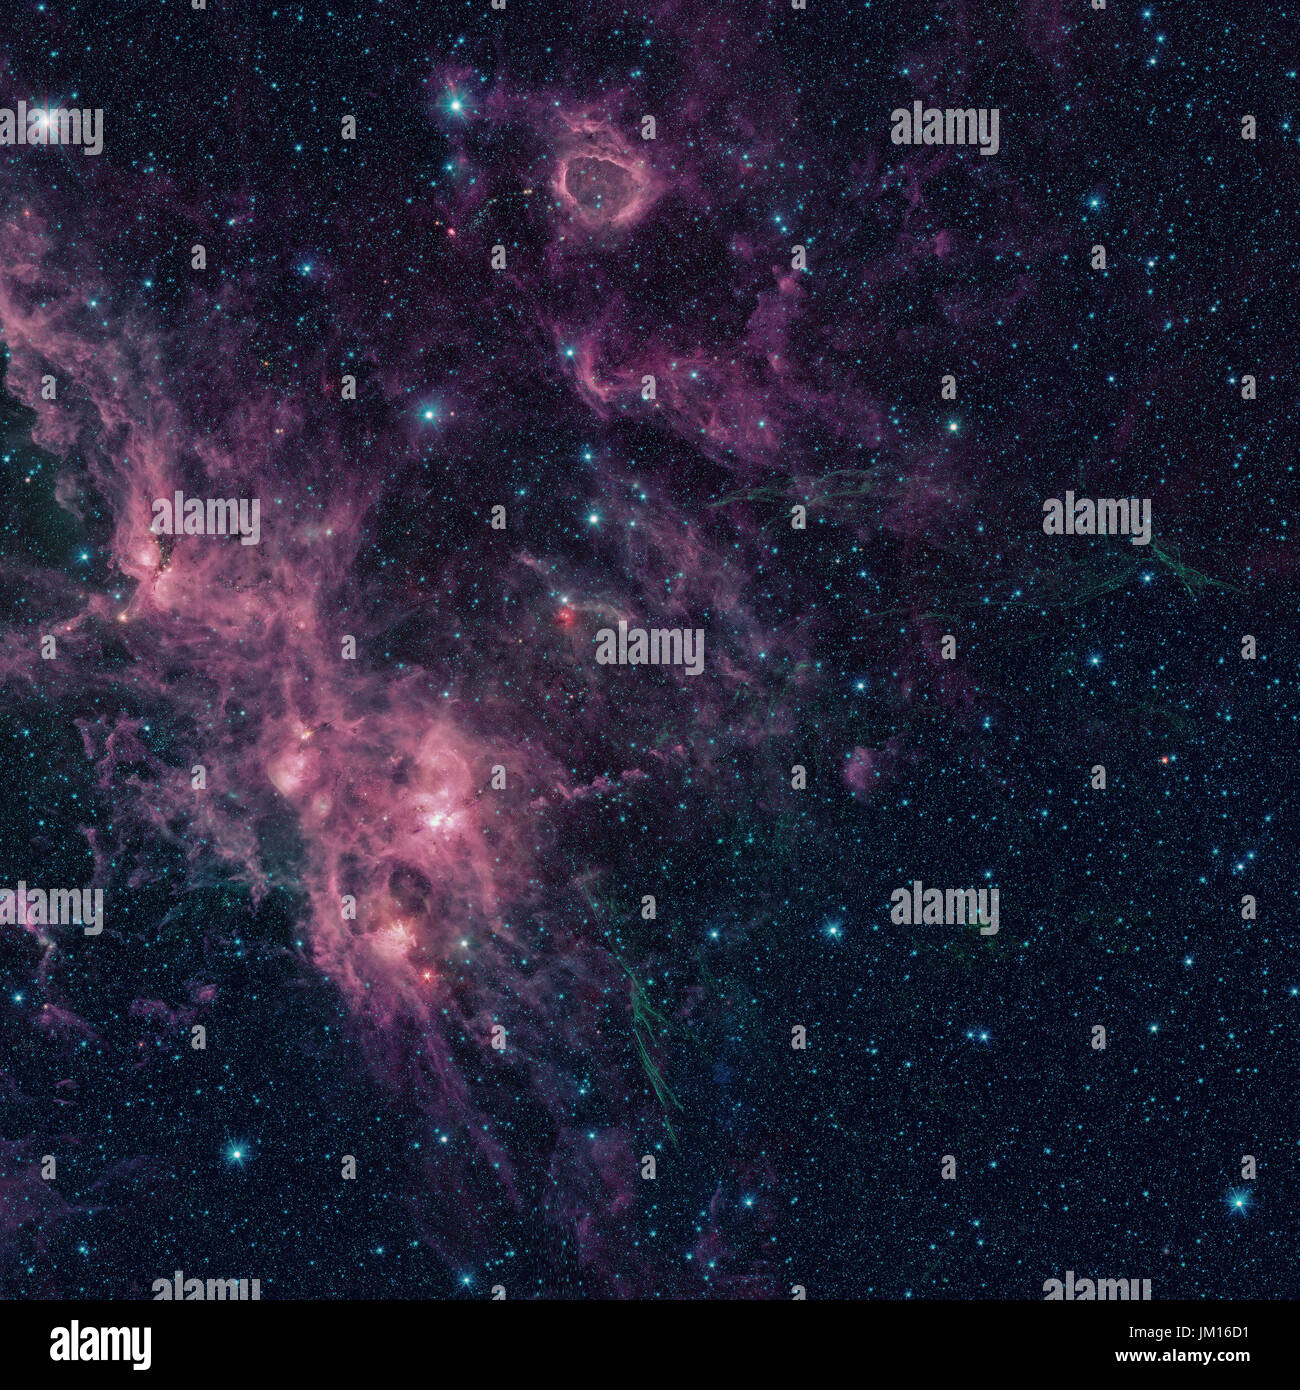 The birth and death of stars. This region contains portions of what are known as the W3 and W5 star-forming regions. Retouched colored image. Elements Stock Photo